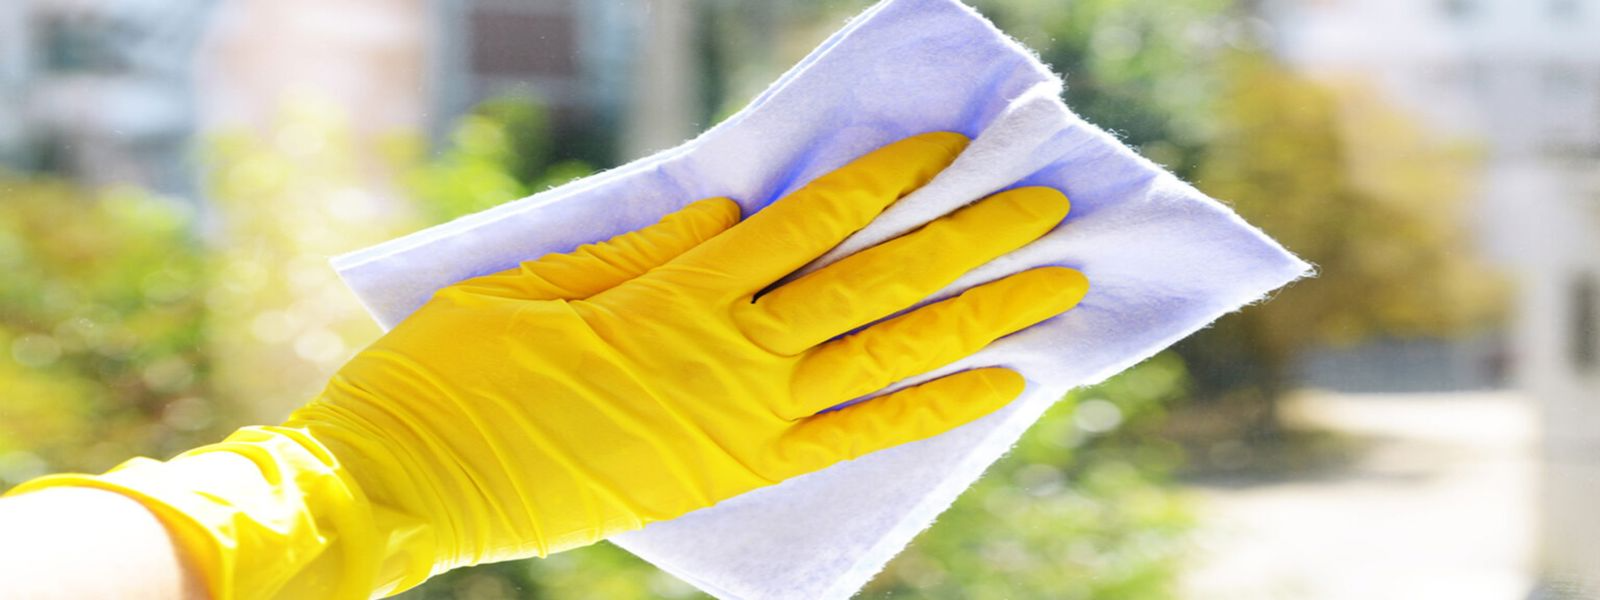 ESTKO AS - We specialize in the development, production, and sales of eco-friendly cleaning and disinfectant products.